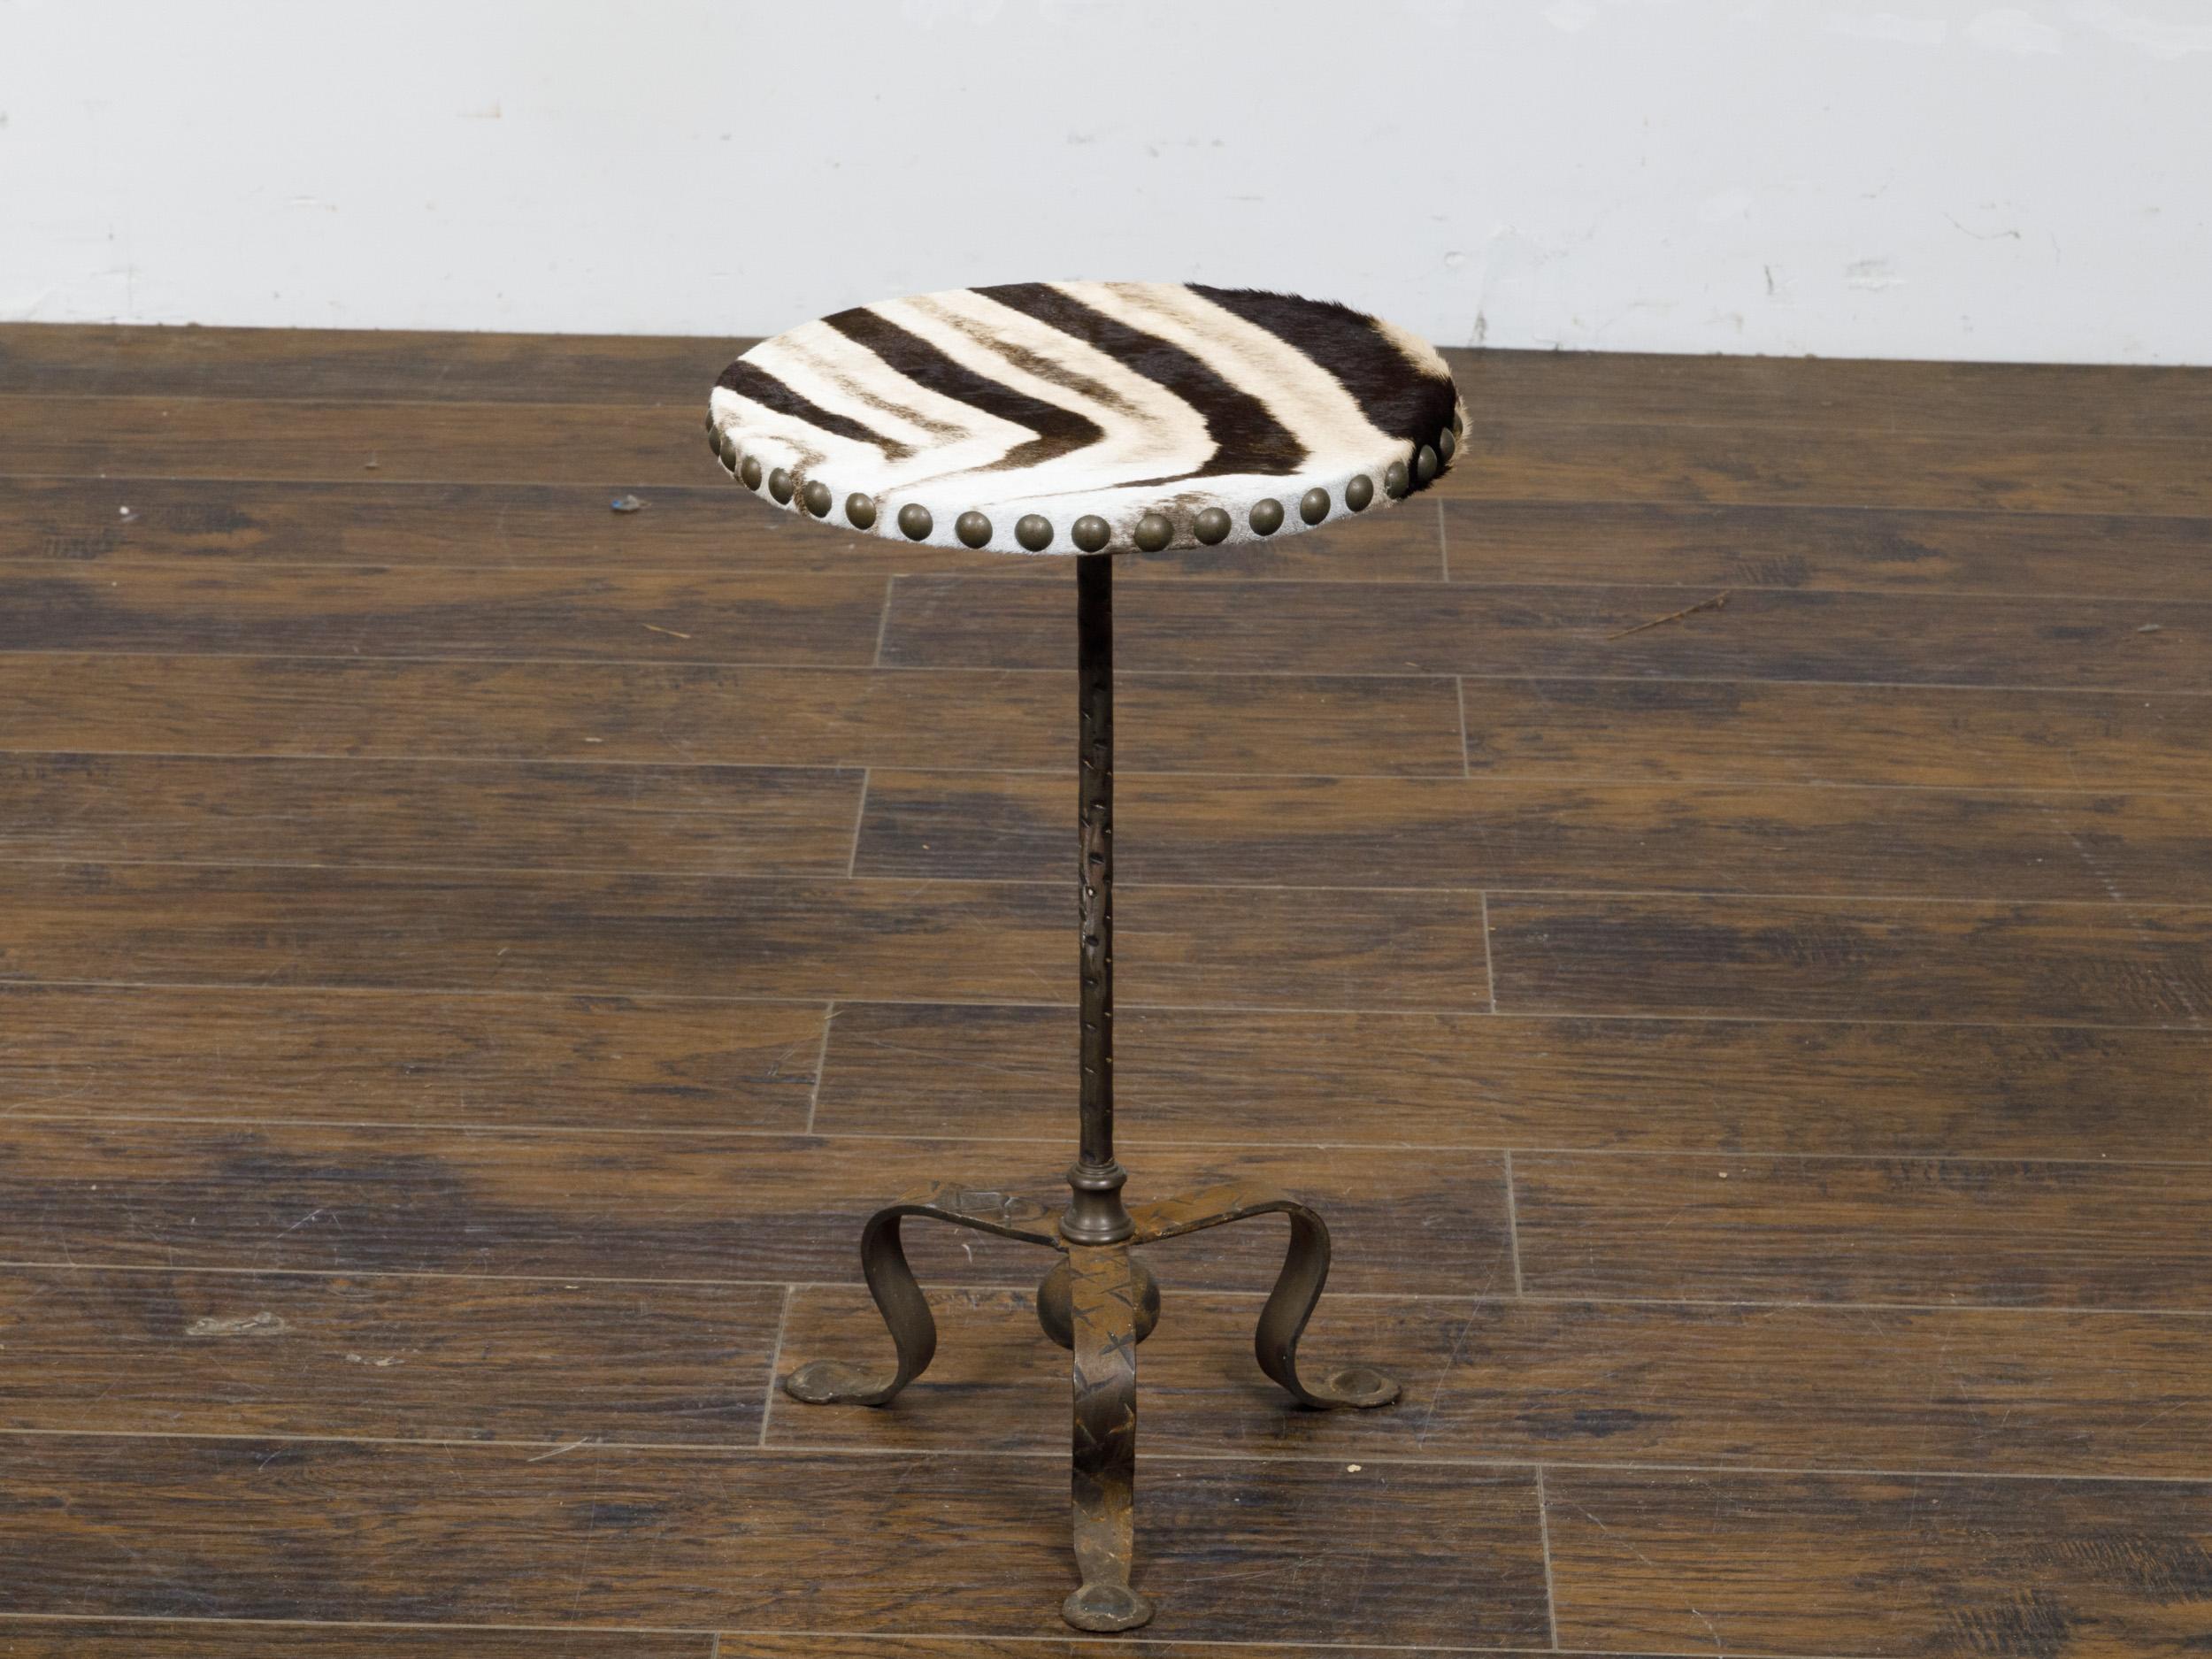 20th Century Midcentury French Iron and Zebra Hide Guéridon Table with Tripod Scrolling Base For Sale